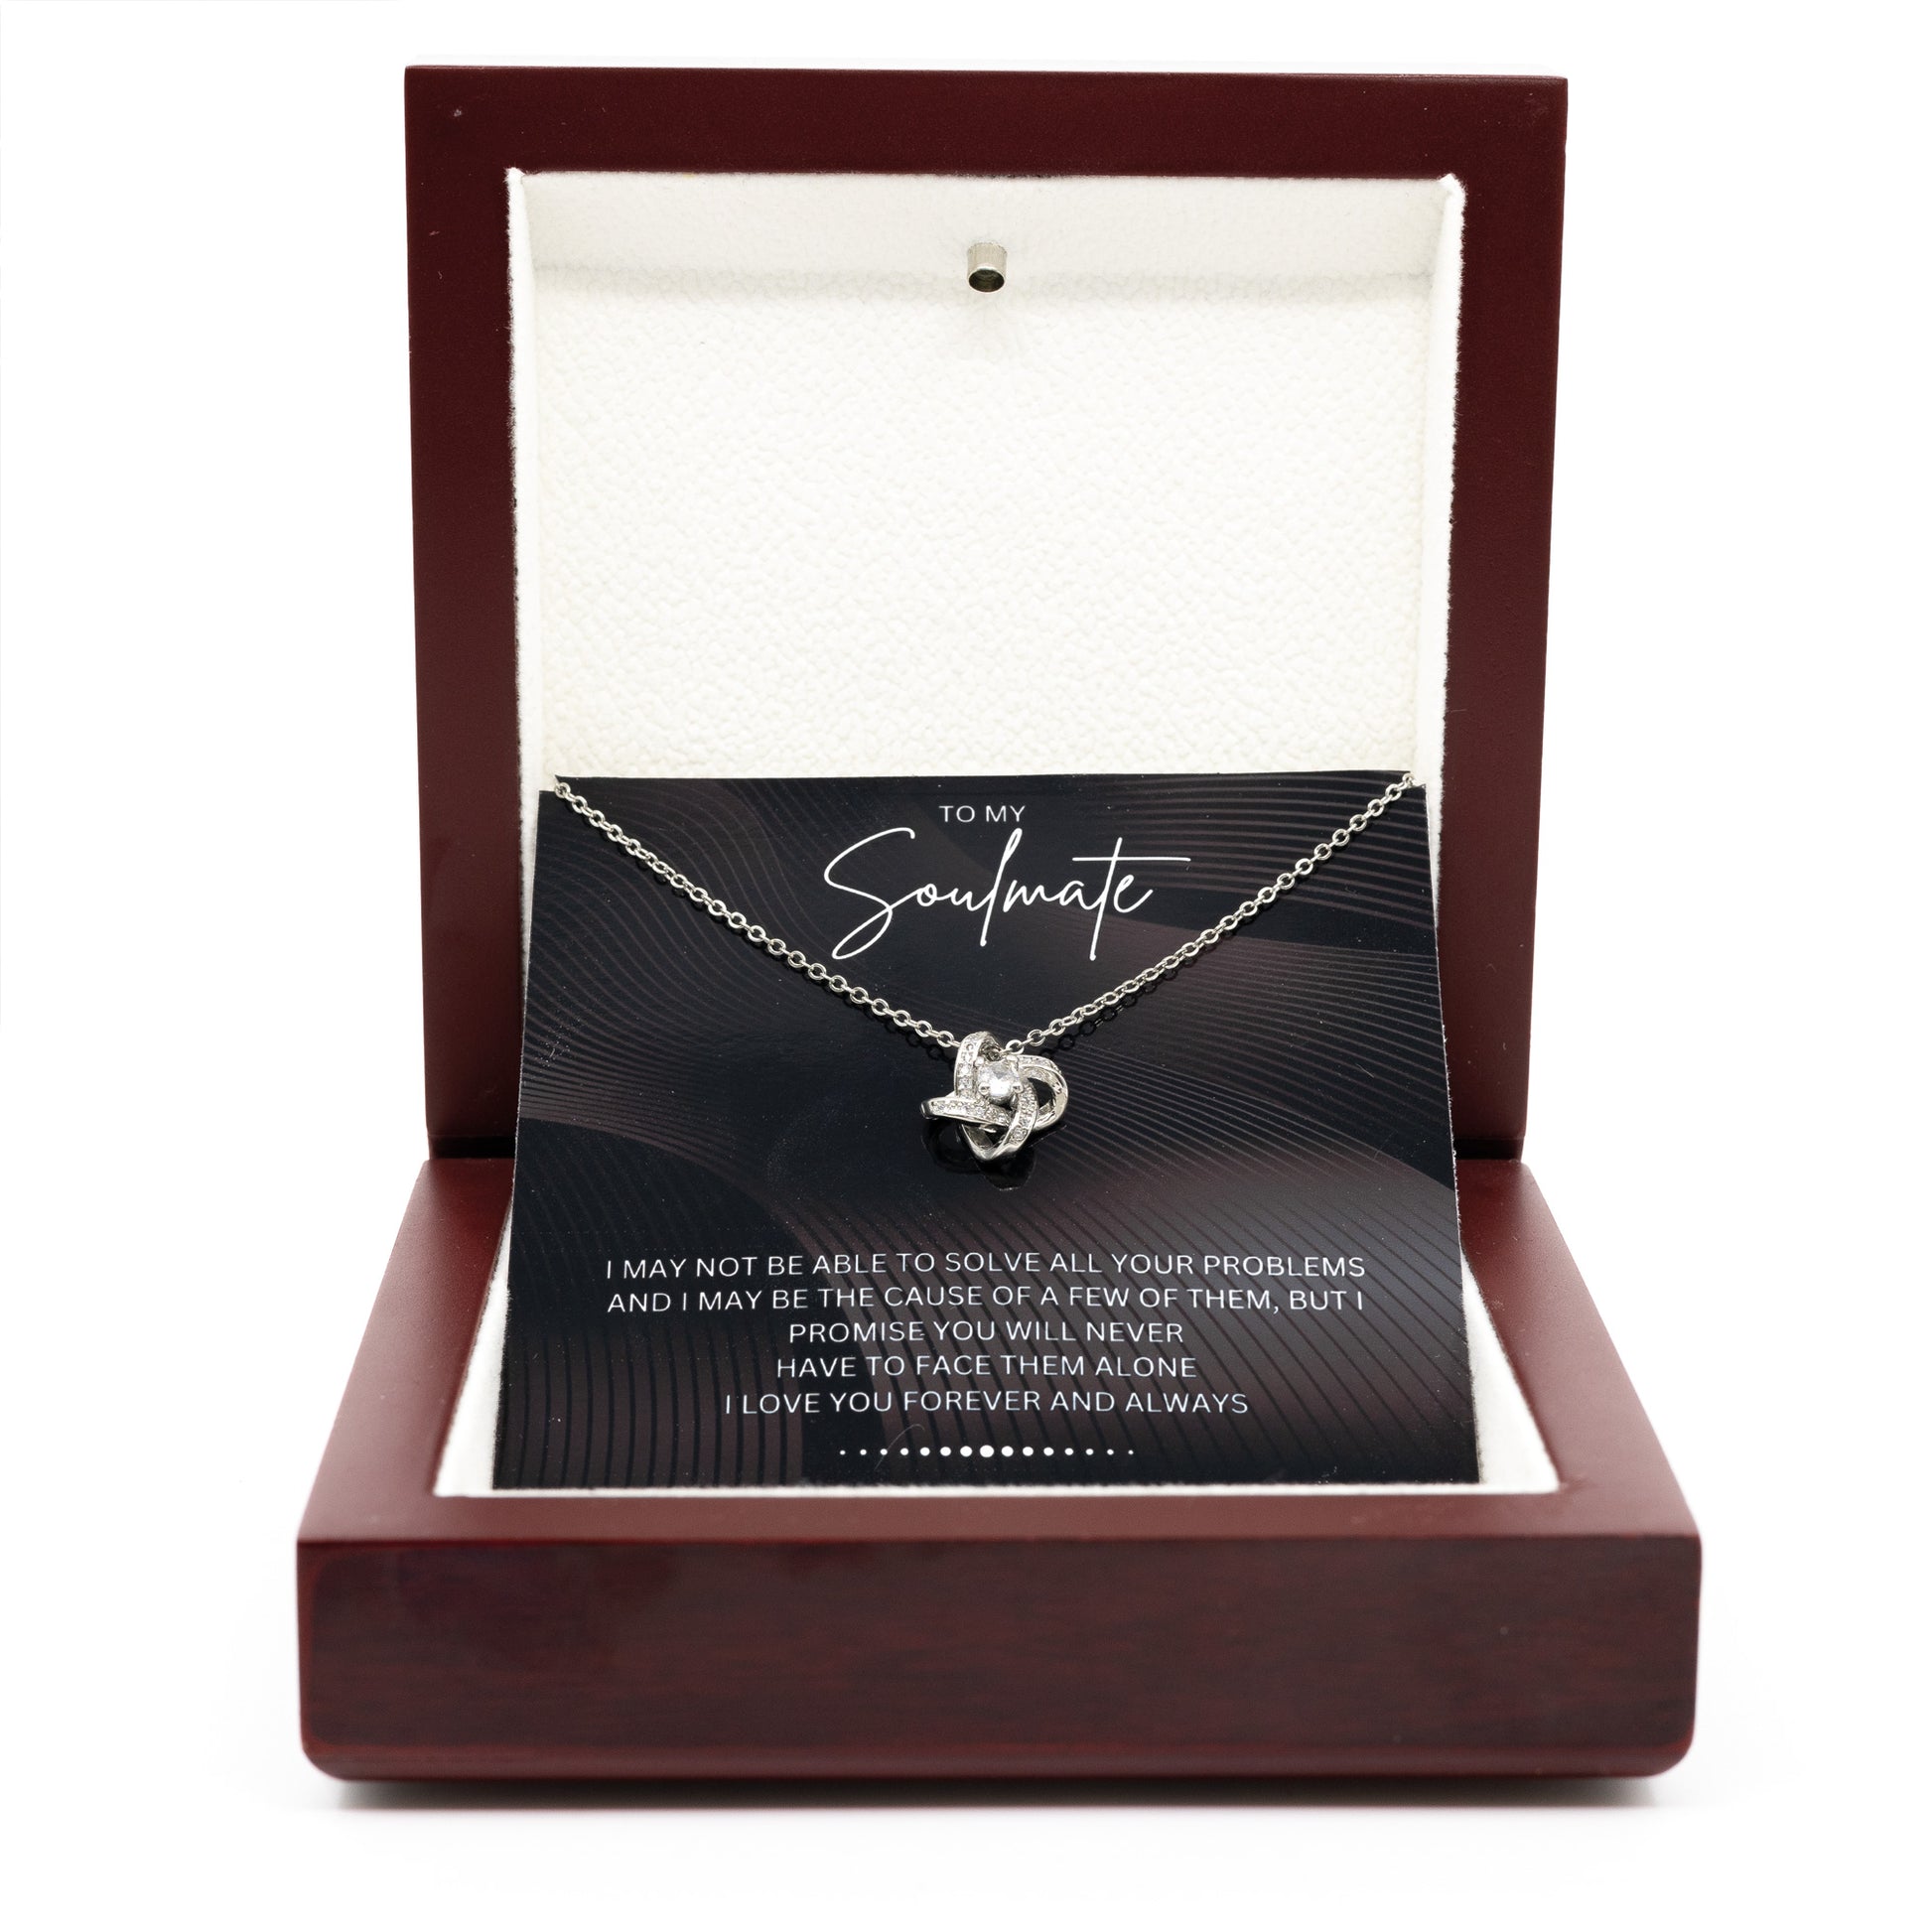 To My Soulmate - Alluring Beauty - Silver Curved Zircon Heart Pendant - For Wife, Girlfriend